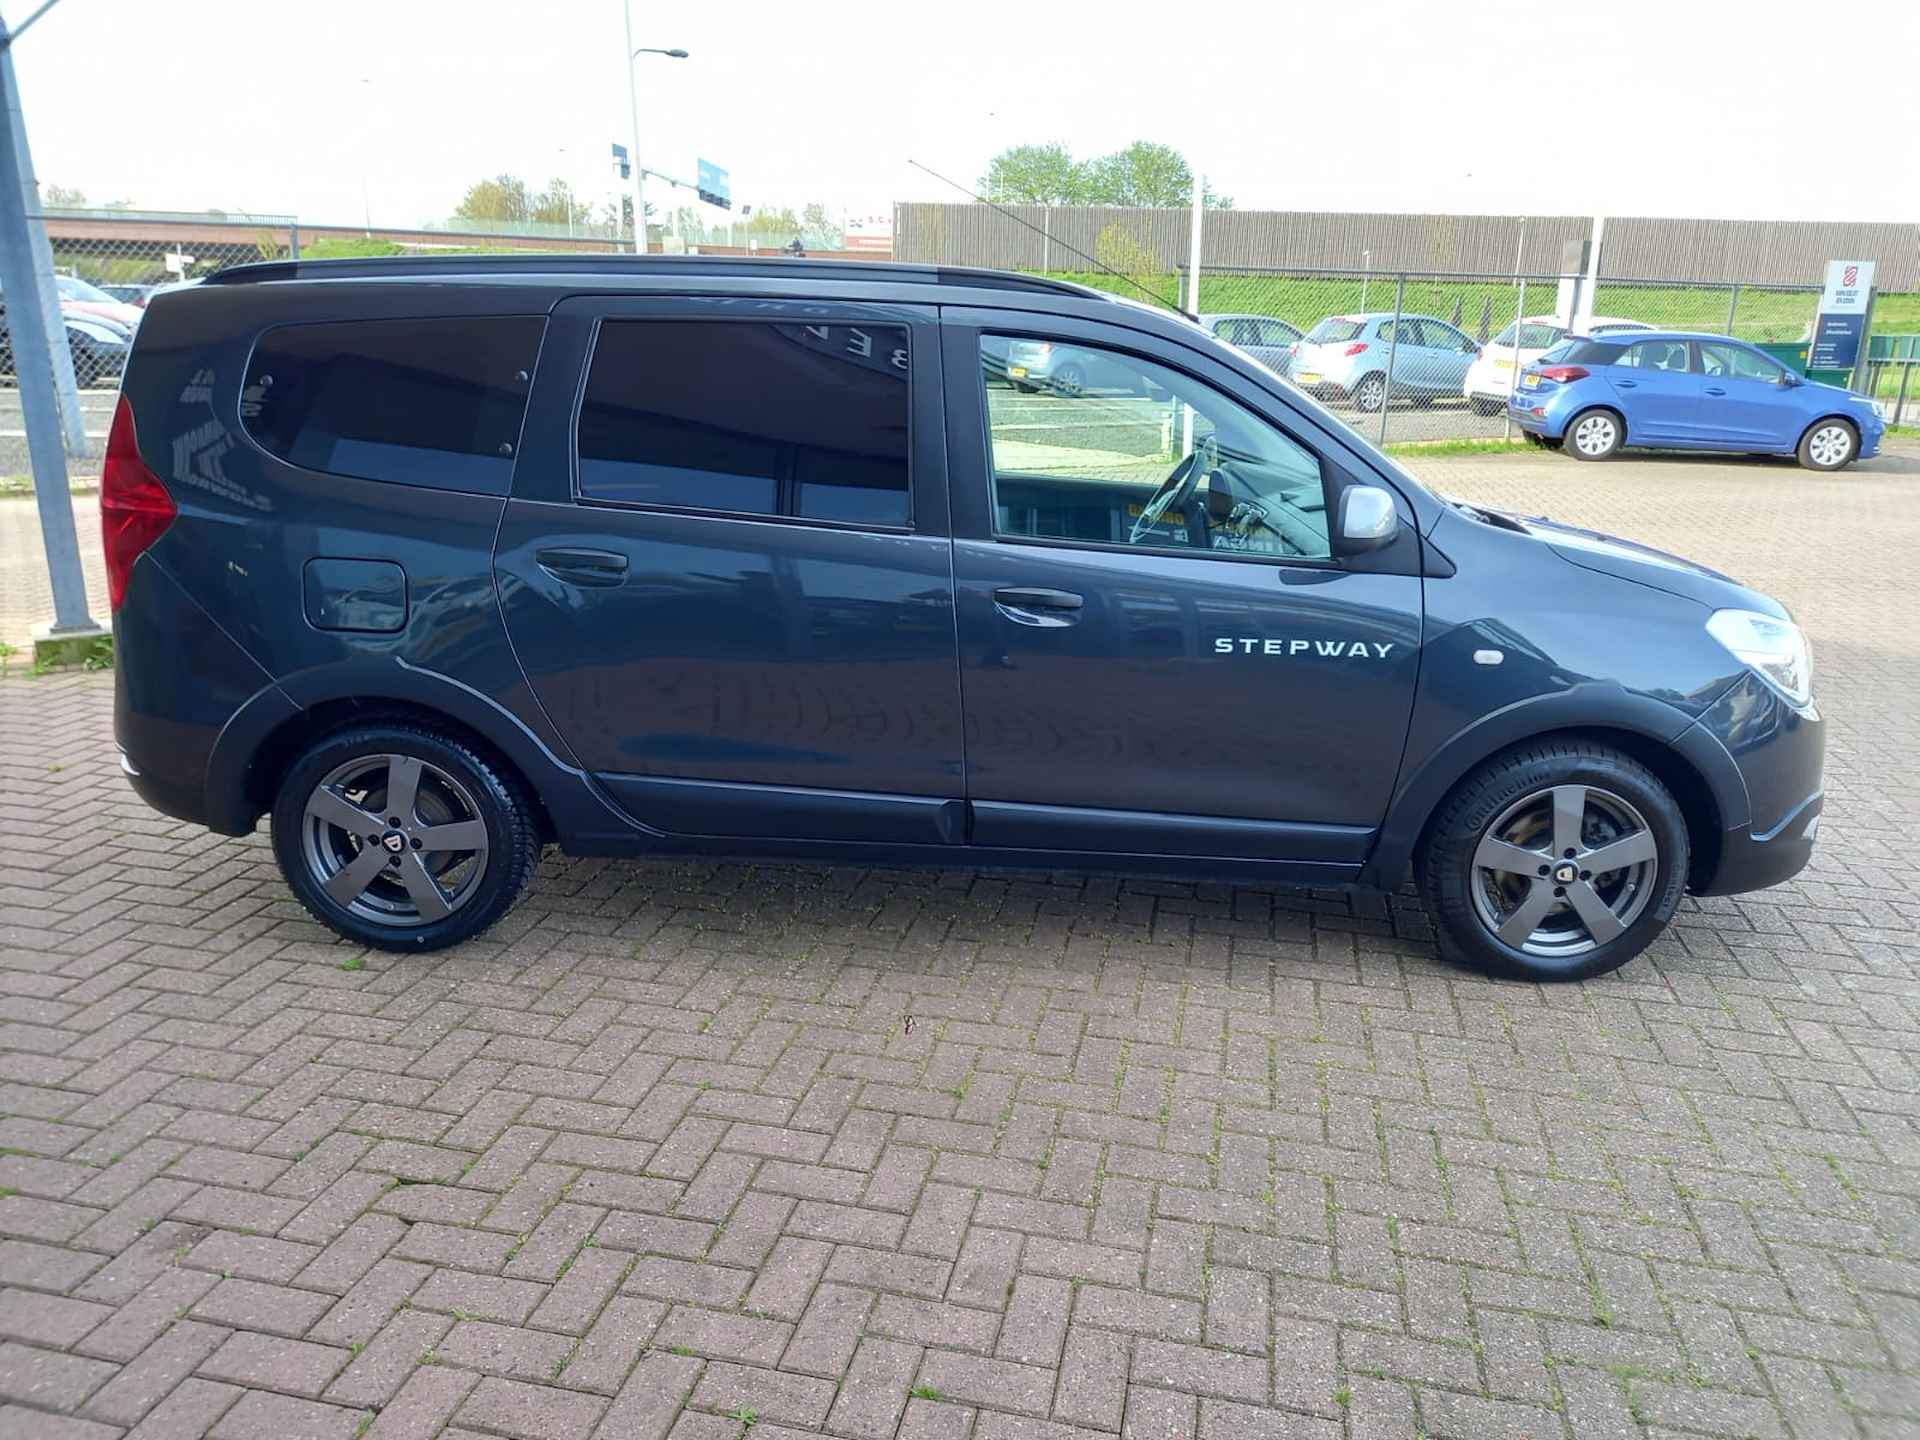 Dacia Lodgy 1.2 TCe Série Limitée Stepway 7p. Airco, Multimedia systeem, Navigatie, Cruise control, Bluetooth telefoonverbinding, Parkeersen Nette auto, BOVAG - 5/27